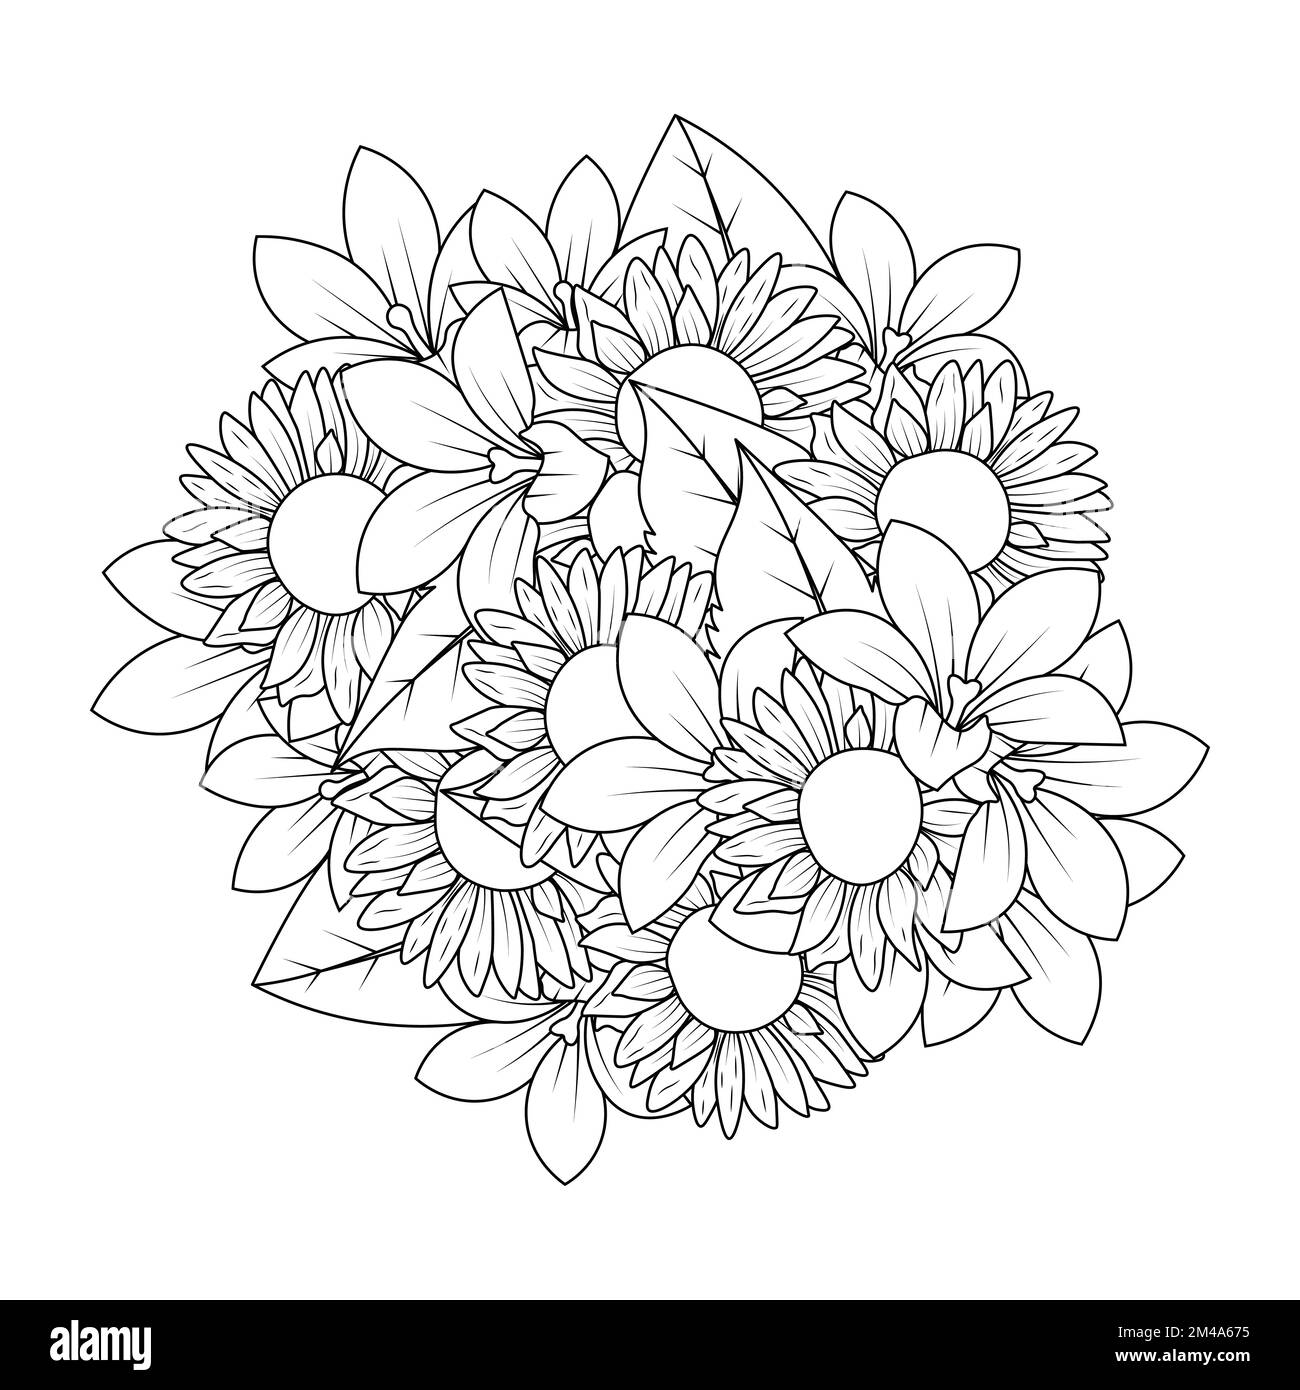 sunflower doodle art vector design with line art coloring page and simple pencil easy sketches drawing Stock Vector